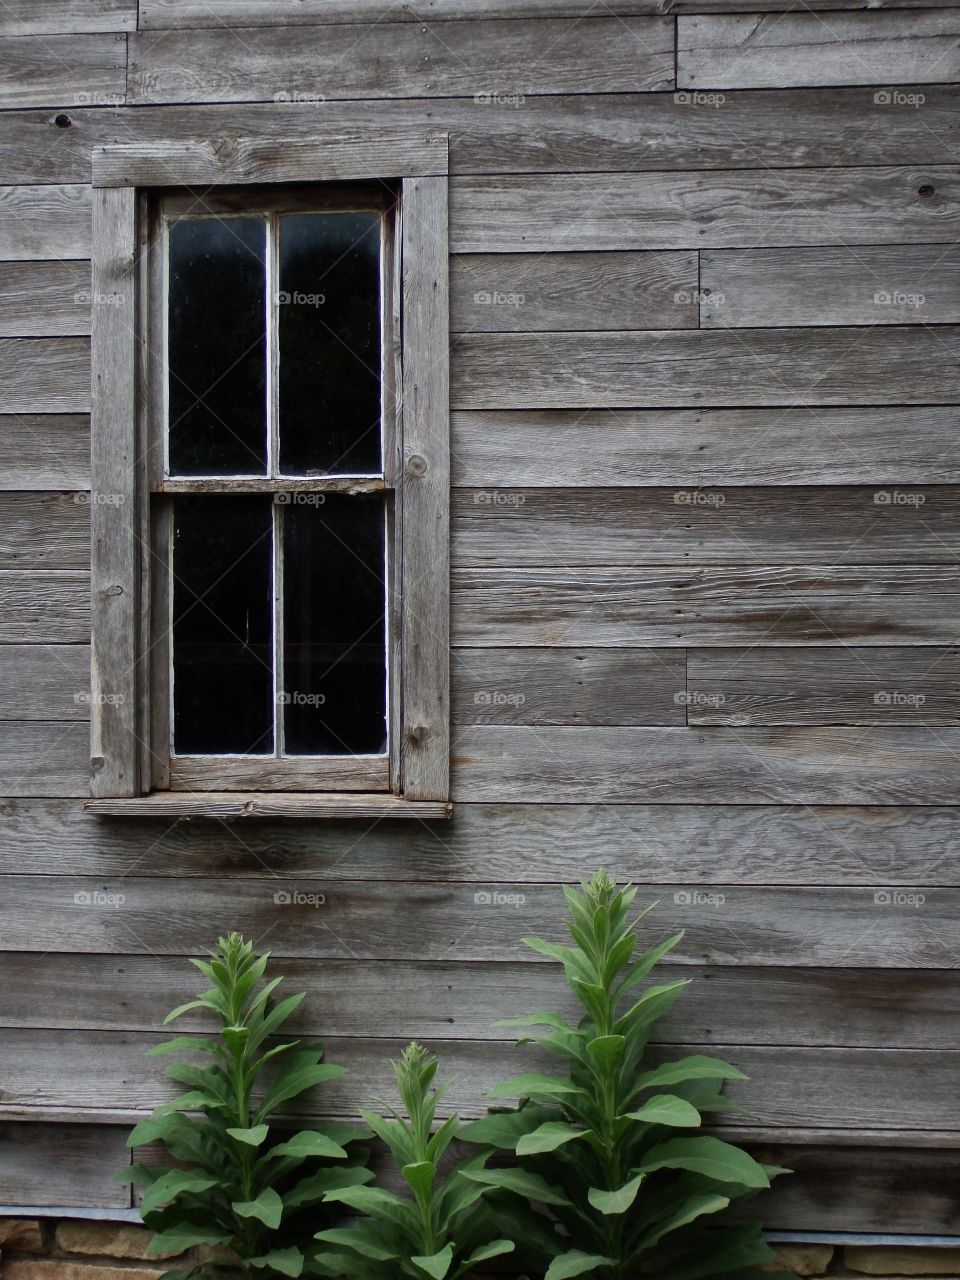 A window on and old wooden building.